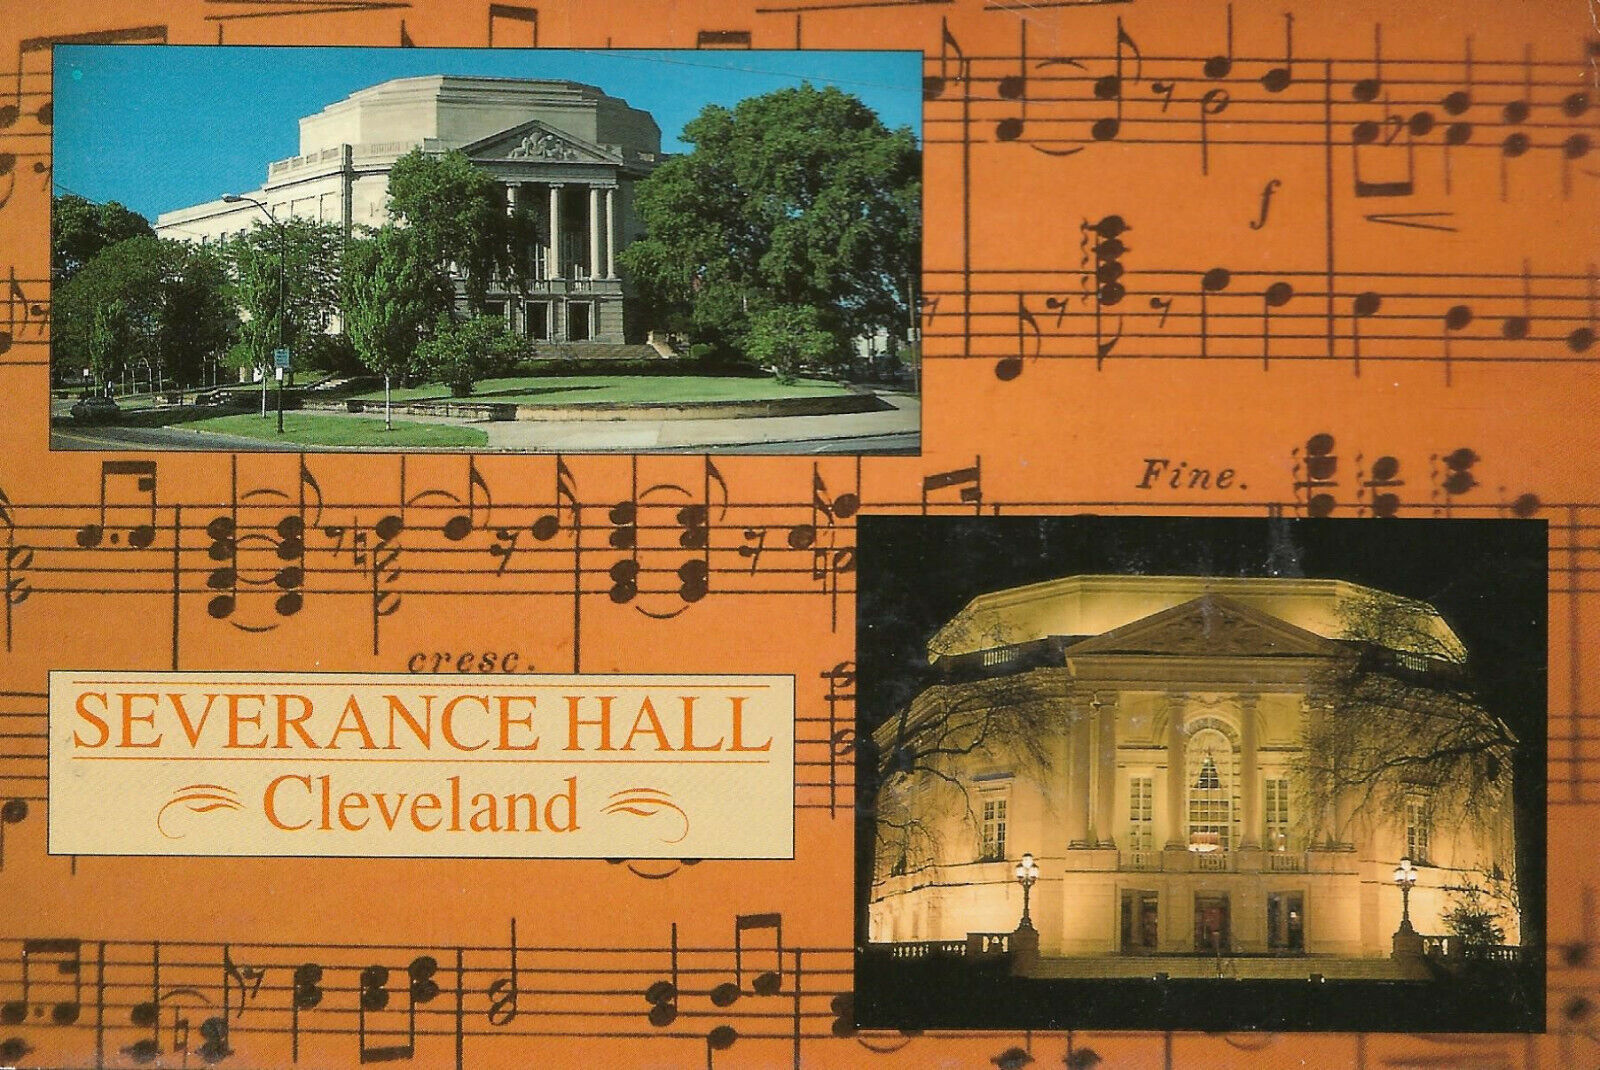 House Clearance - USA-Ohio-Cleveland-Severance Hall-Home of Cleveland Orchestra - 1996